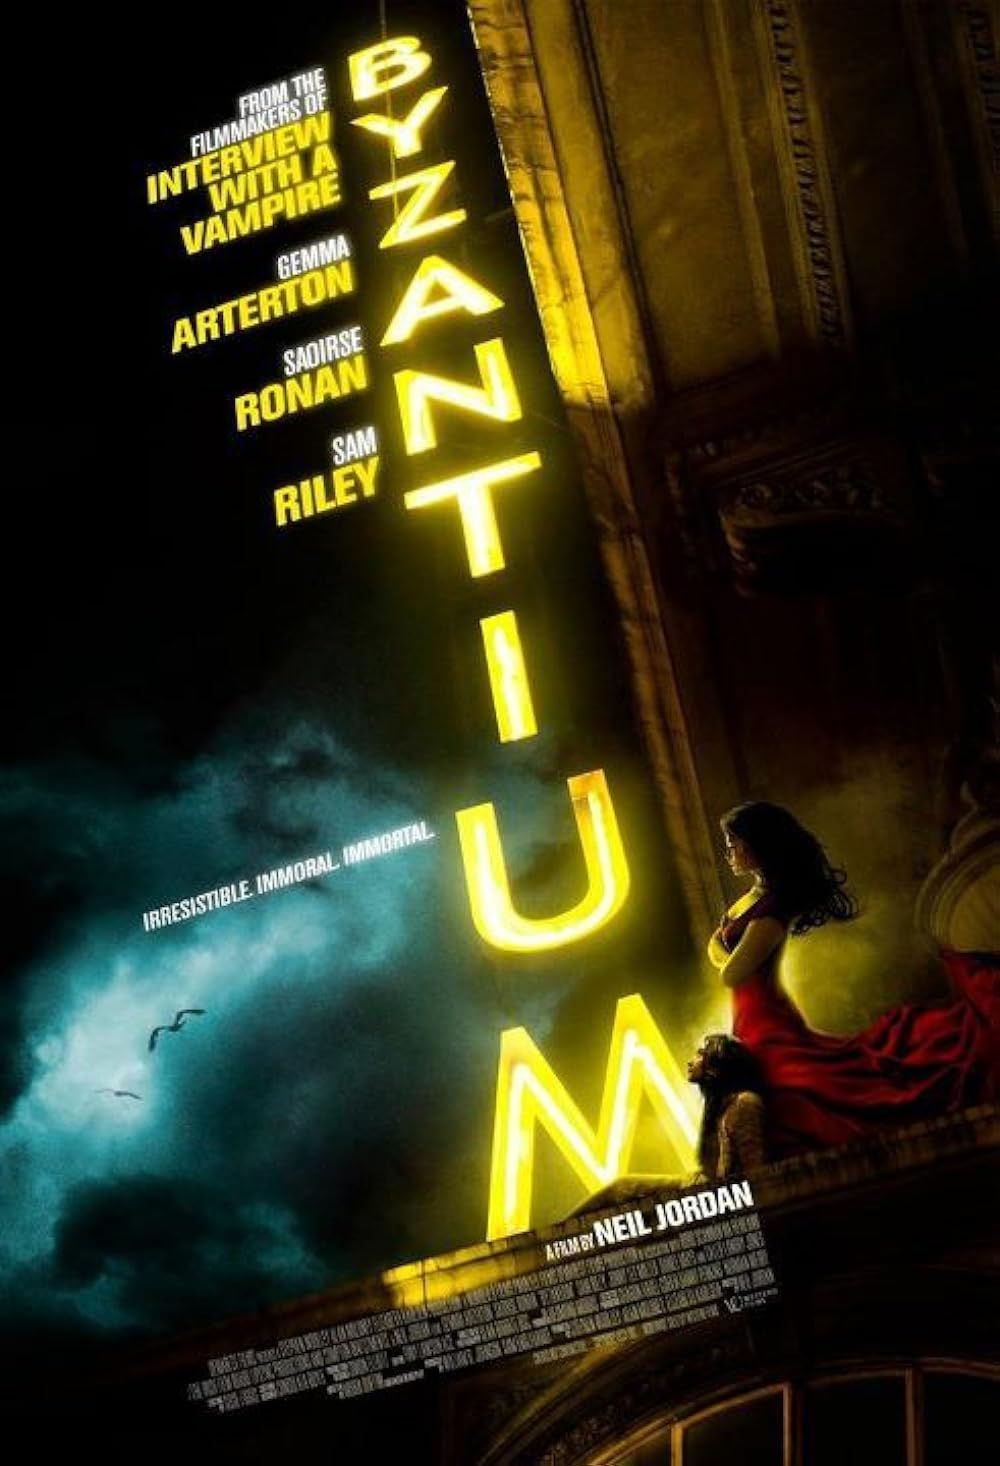 A poster of Byzantium featuring a woman leaning against a wall with a giant neon sign with the movie title in front of her